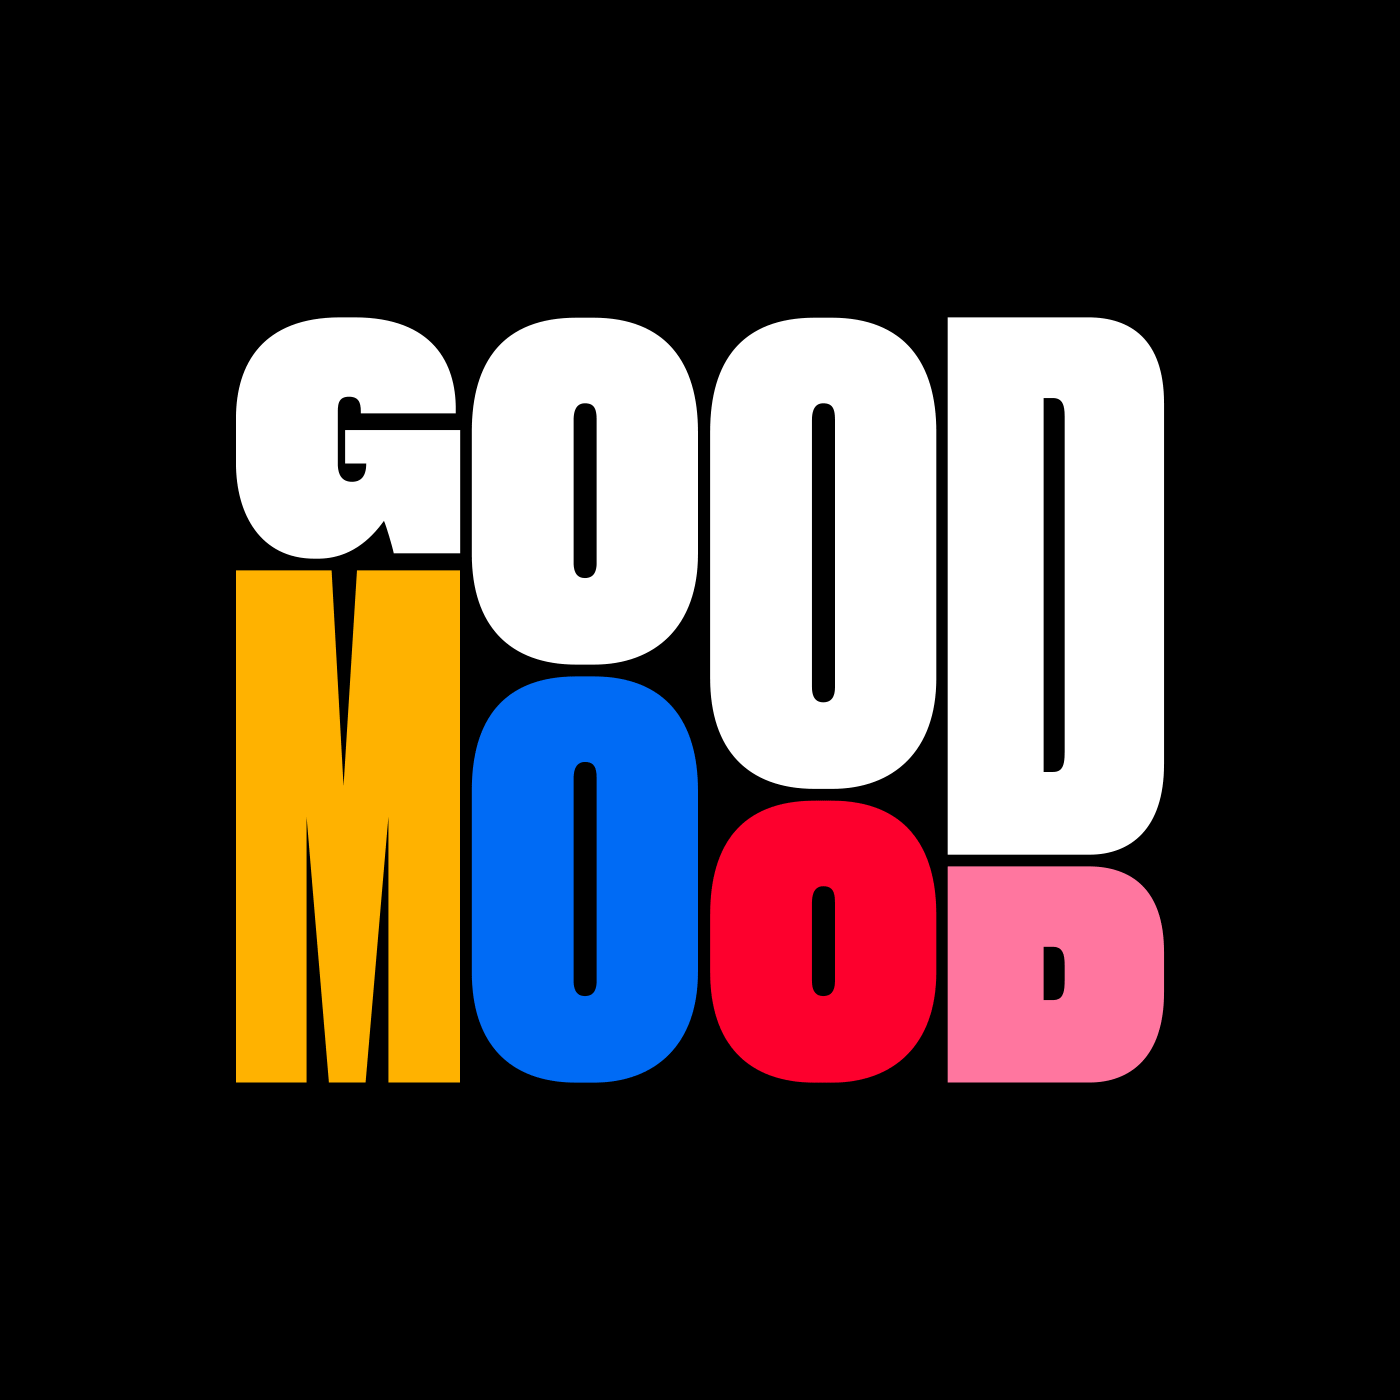 the words good mood written in multicolored letters on a black background with white outline